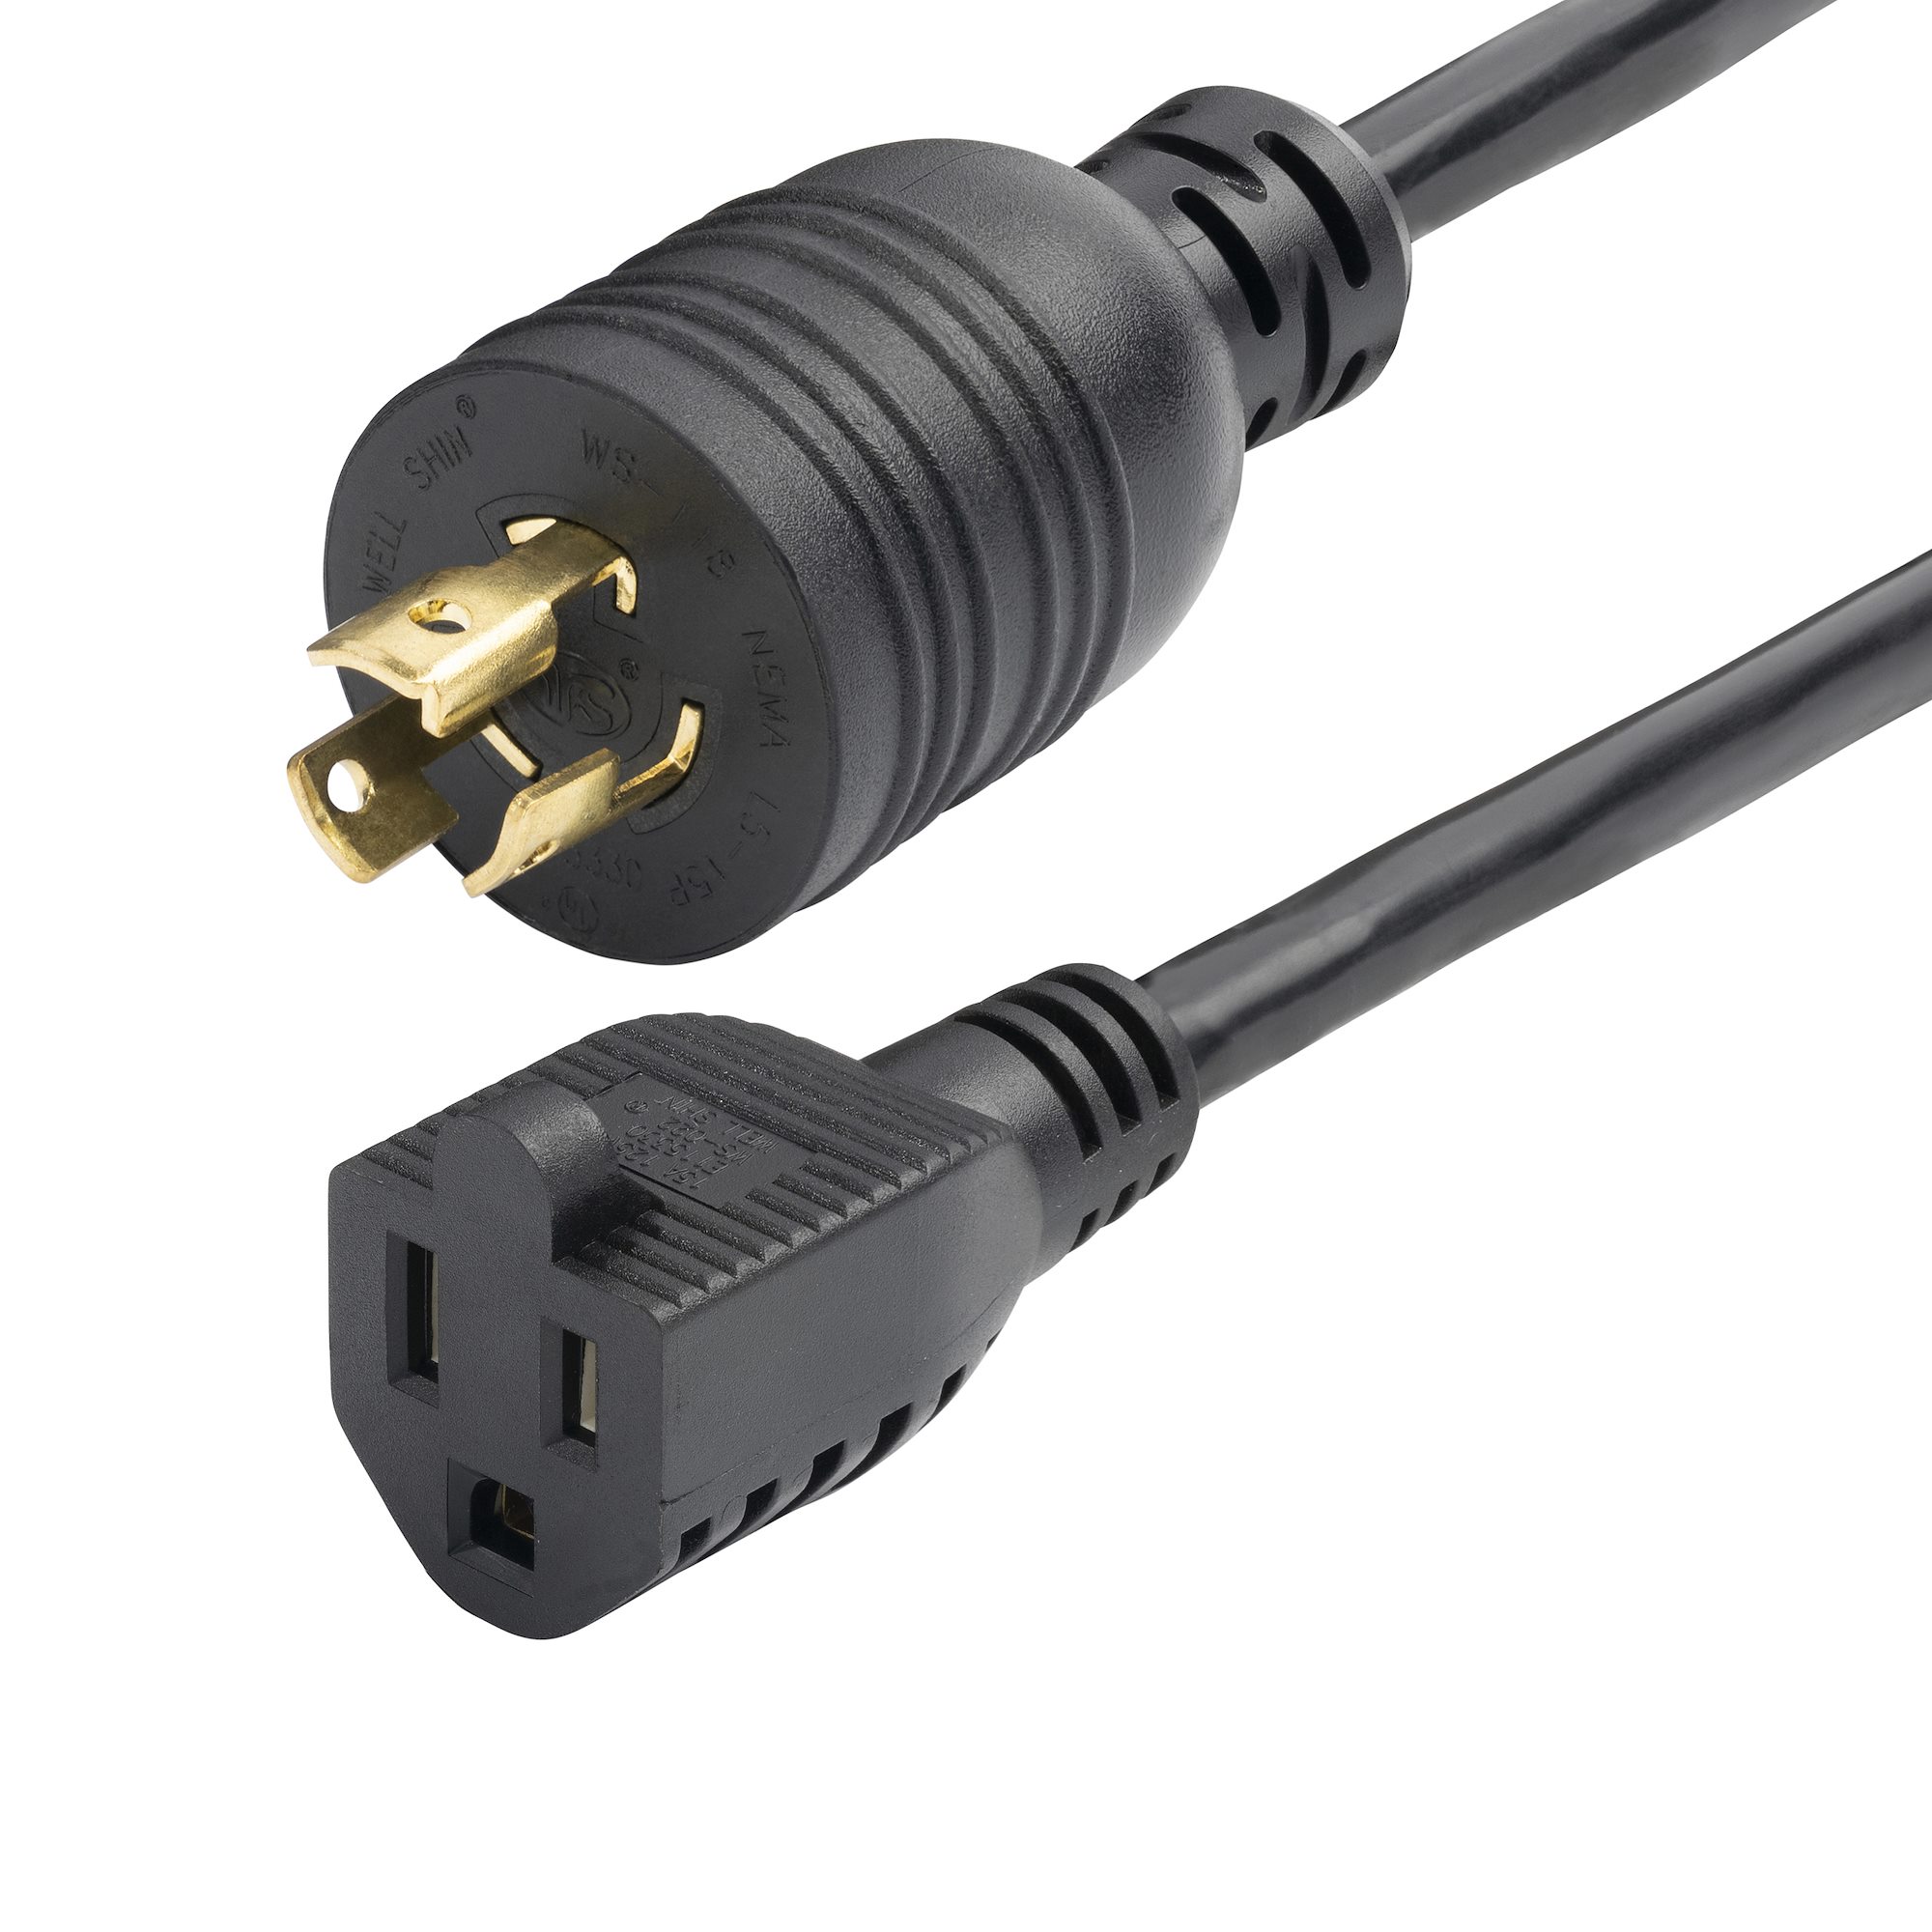 1ft Power Cord, L5-15P to 5-15R - Computer Power Cables - External